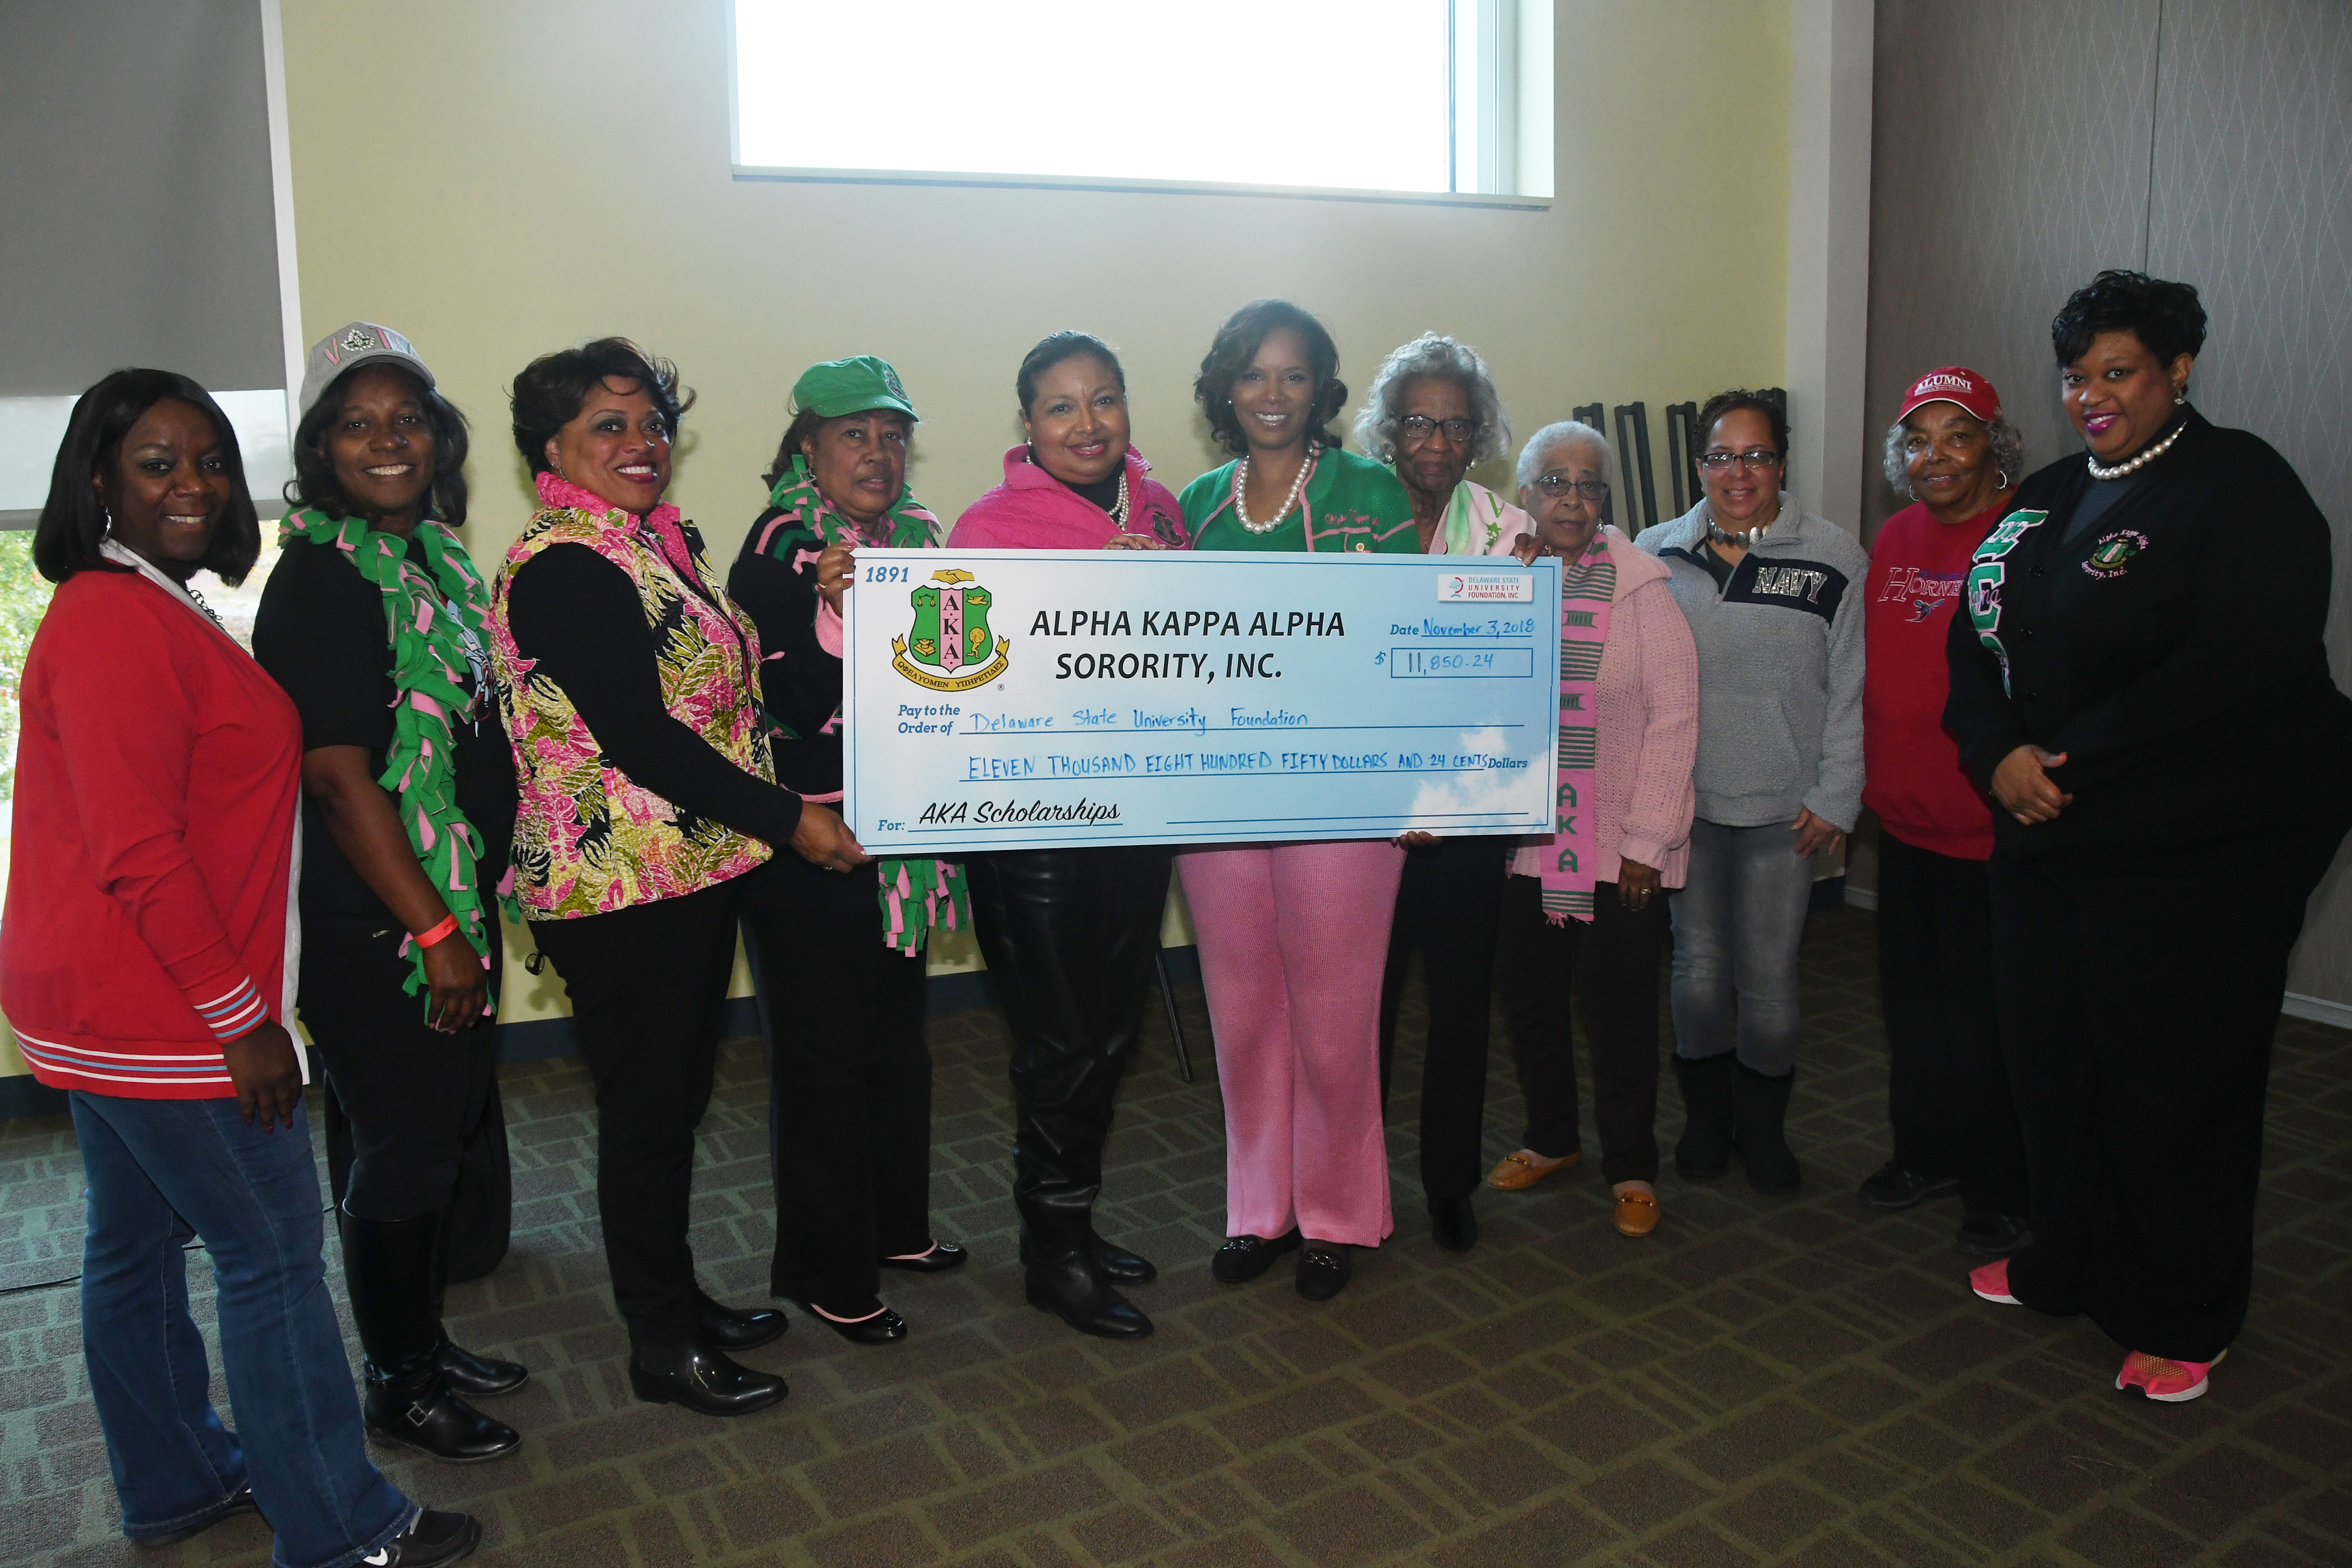 Alpha Kappa Alpha members representing Delaware chapters in Wilmington, Newark and Dover, came together to present a scholarship donation of more than $11,850 to the University.